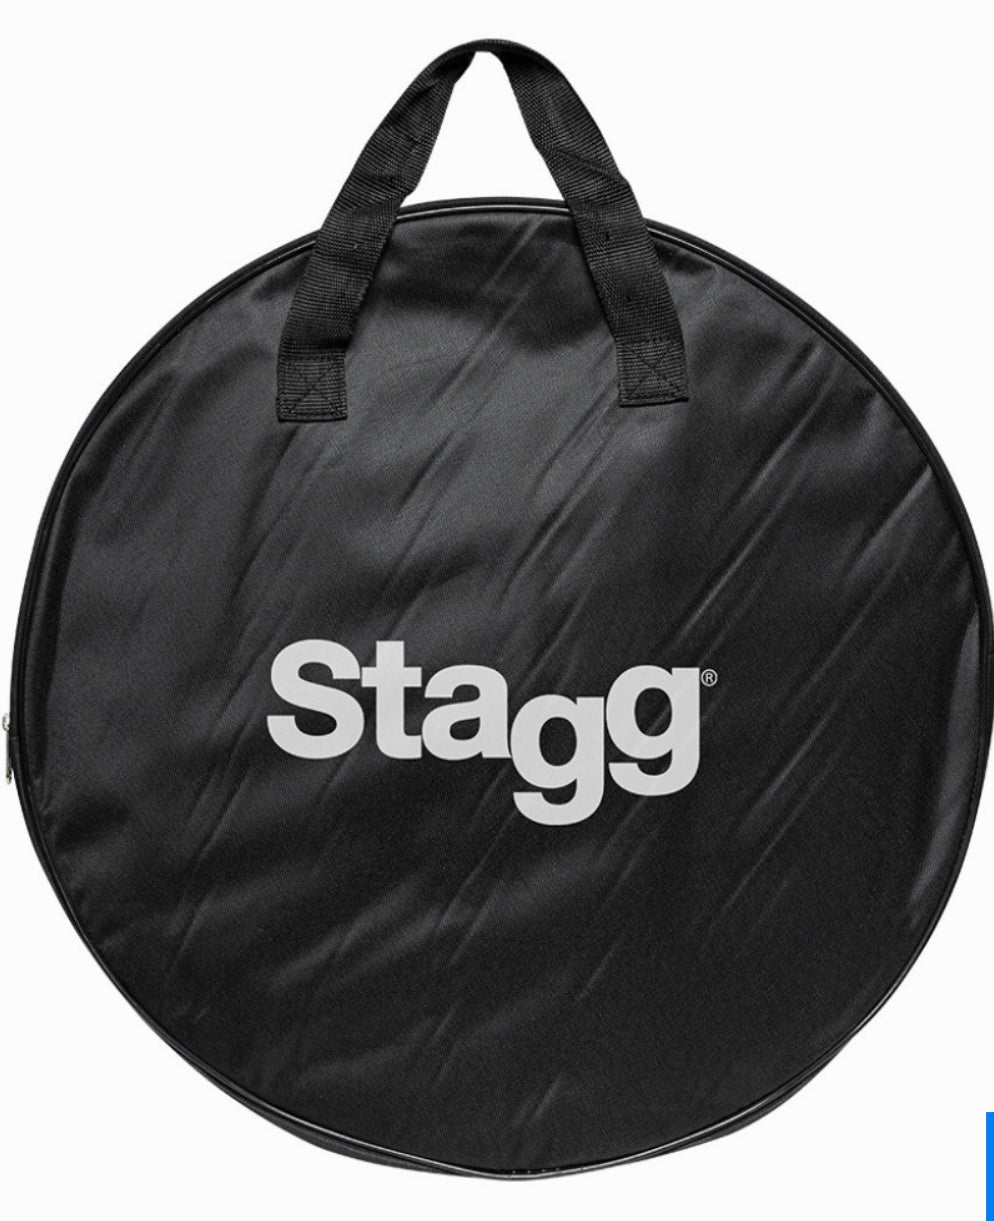 Stagg SX Low Volume Cymbal Set with Bag